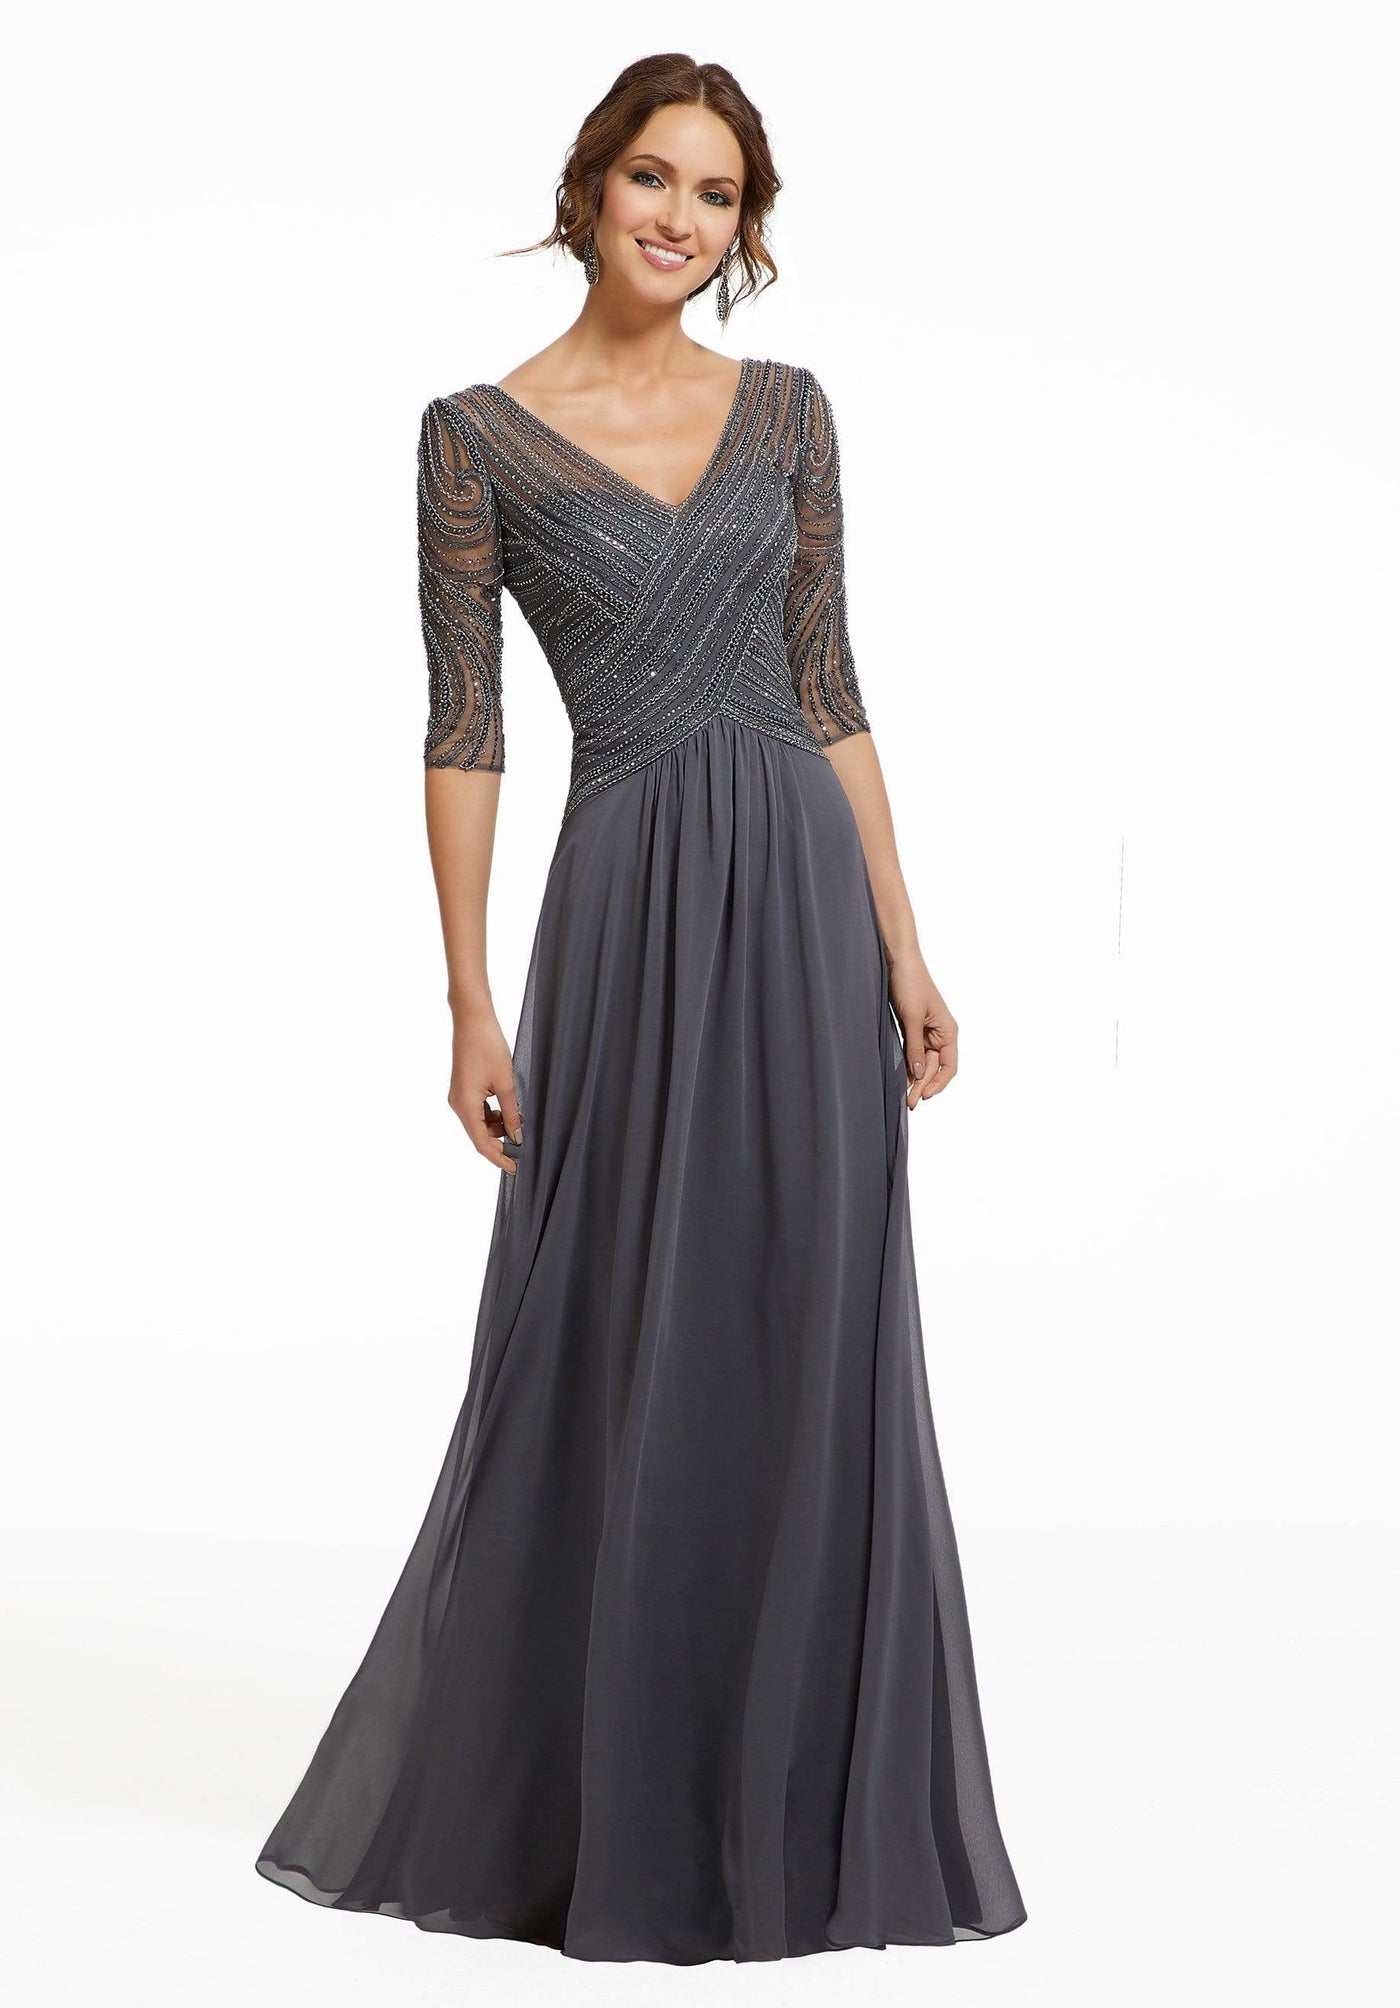 MGNY By Mori Lee - 72028 Beaded V-Neck A-Line Evening Dress Mother of the Bride Dresses 0 / Charcoal